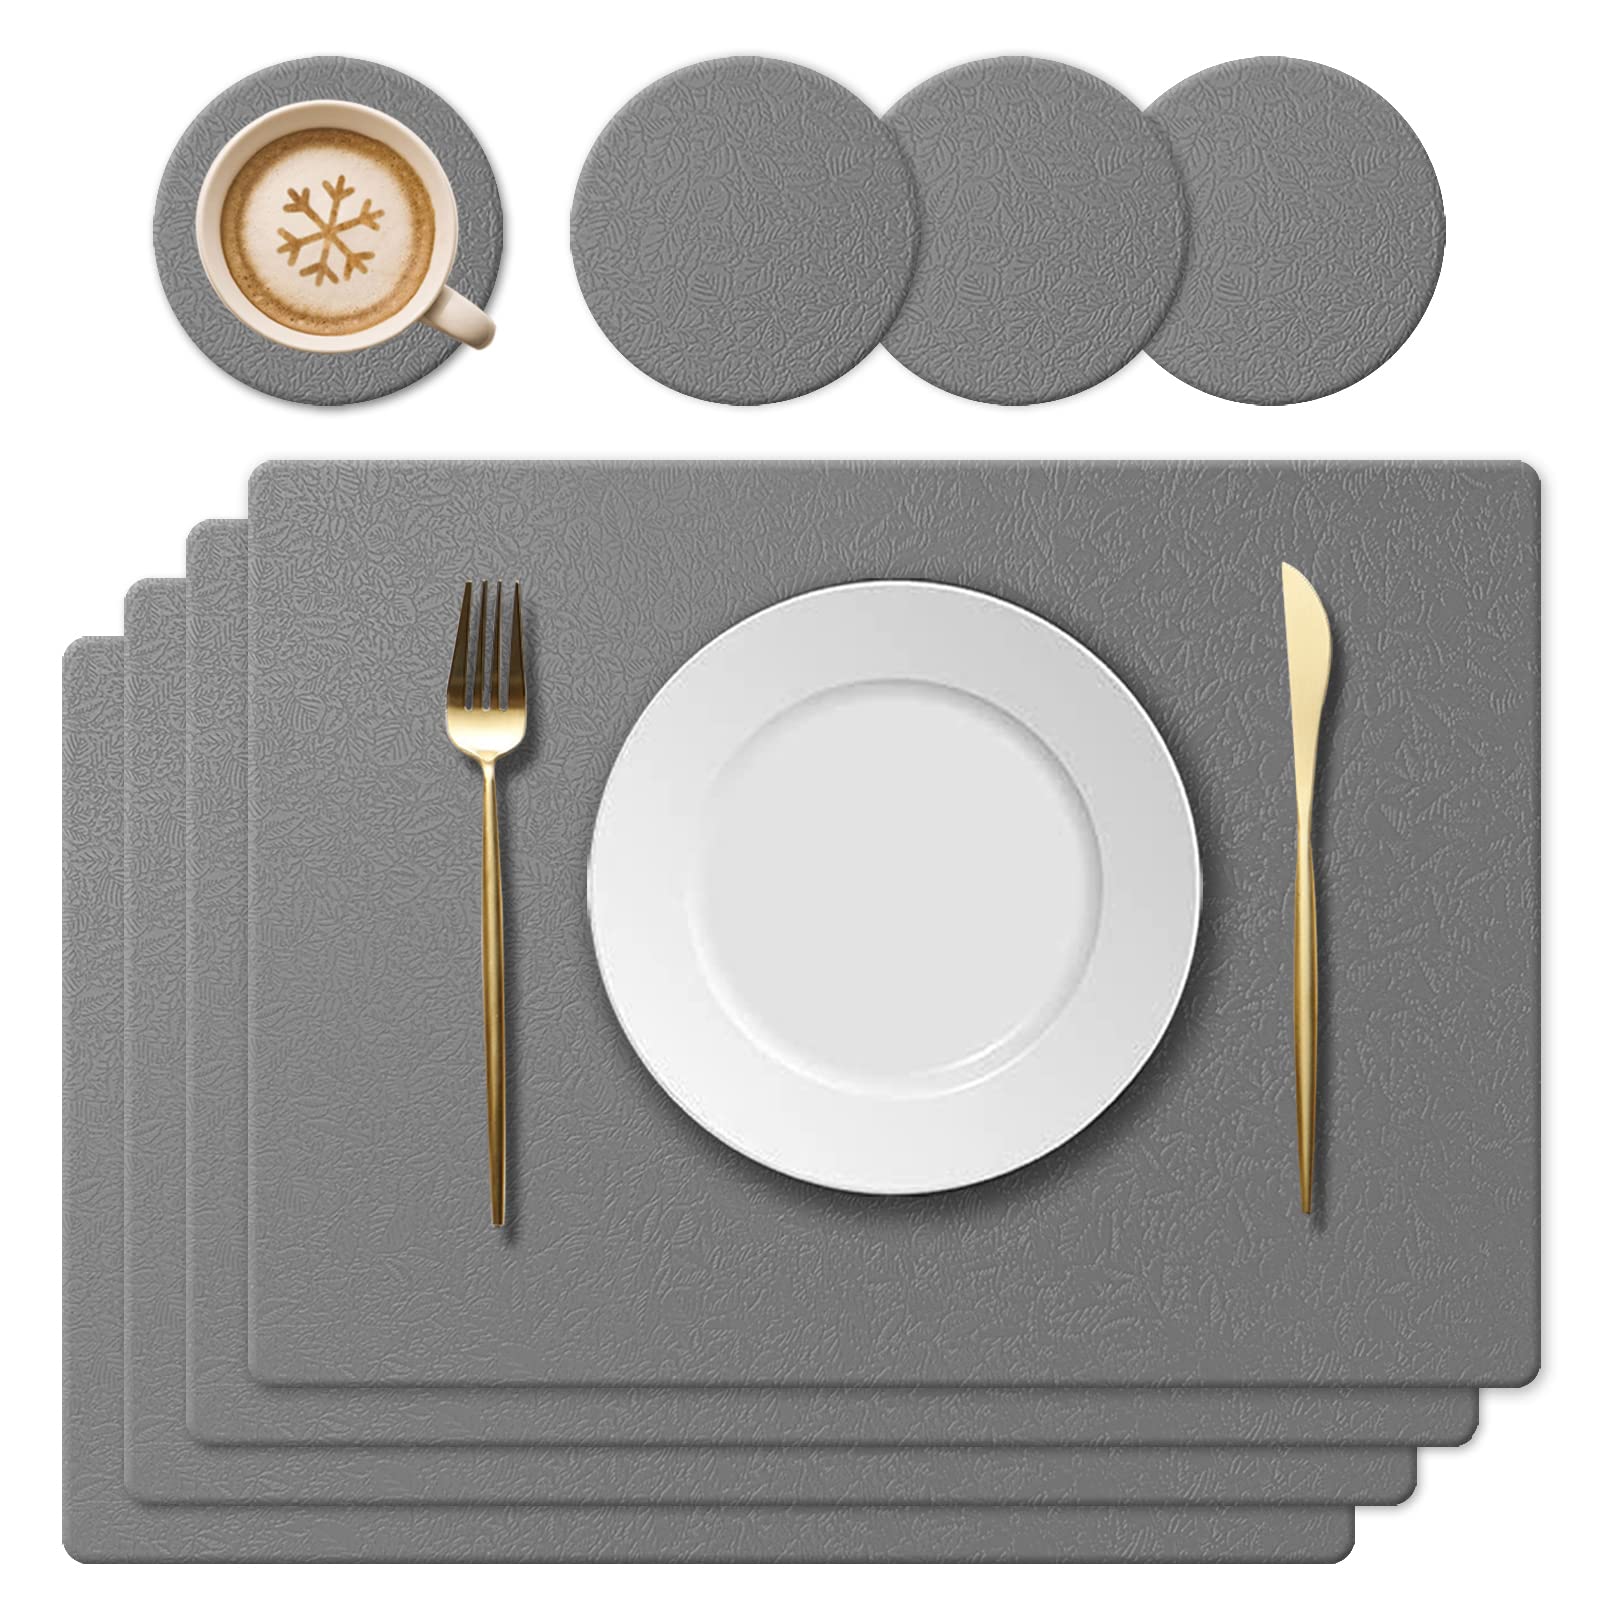 KERYCHIN Silicone Placemats and Round Glass Coasters, Washable Heat Resistant 220 °C, Non-Slip and Waterproof, Decorative Accessories for Restaurant, Kitchen, Hotel, 40 x 30 cm, 8 Pieces, Dark Grey